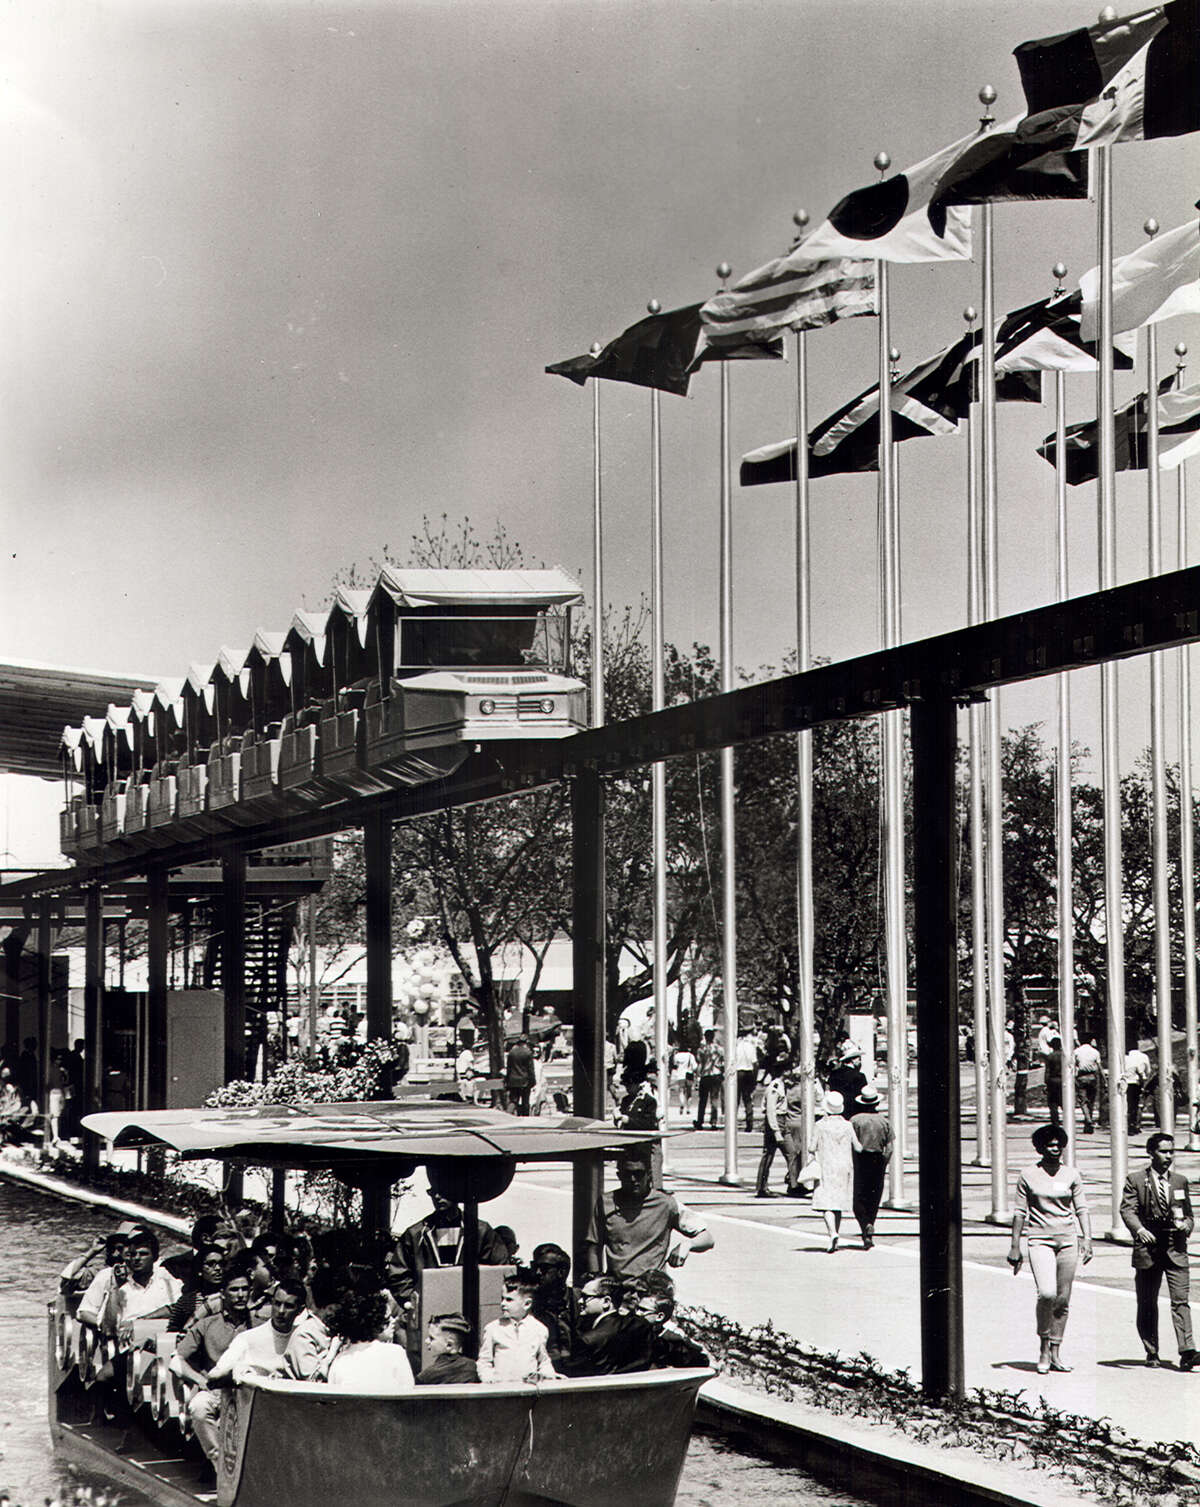 The mini monorail is pictured during HemisFair. 1968.